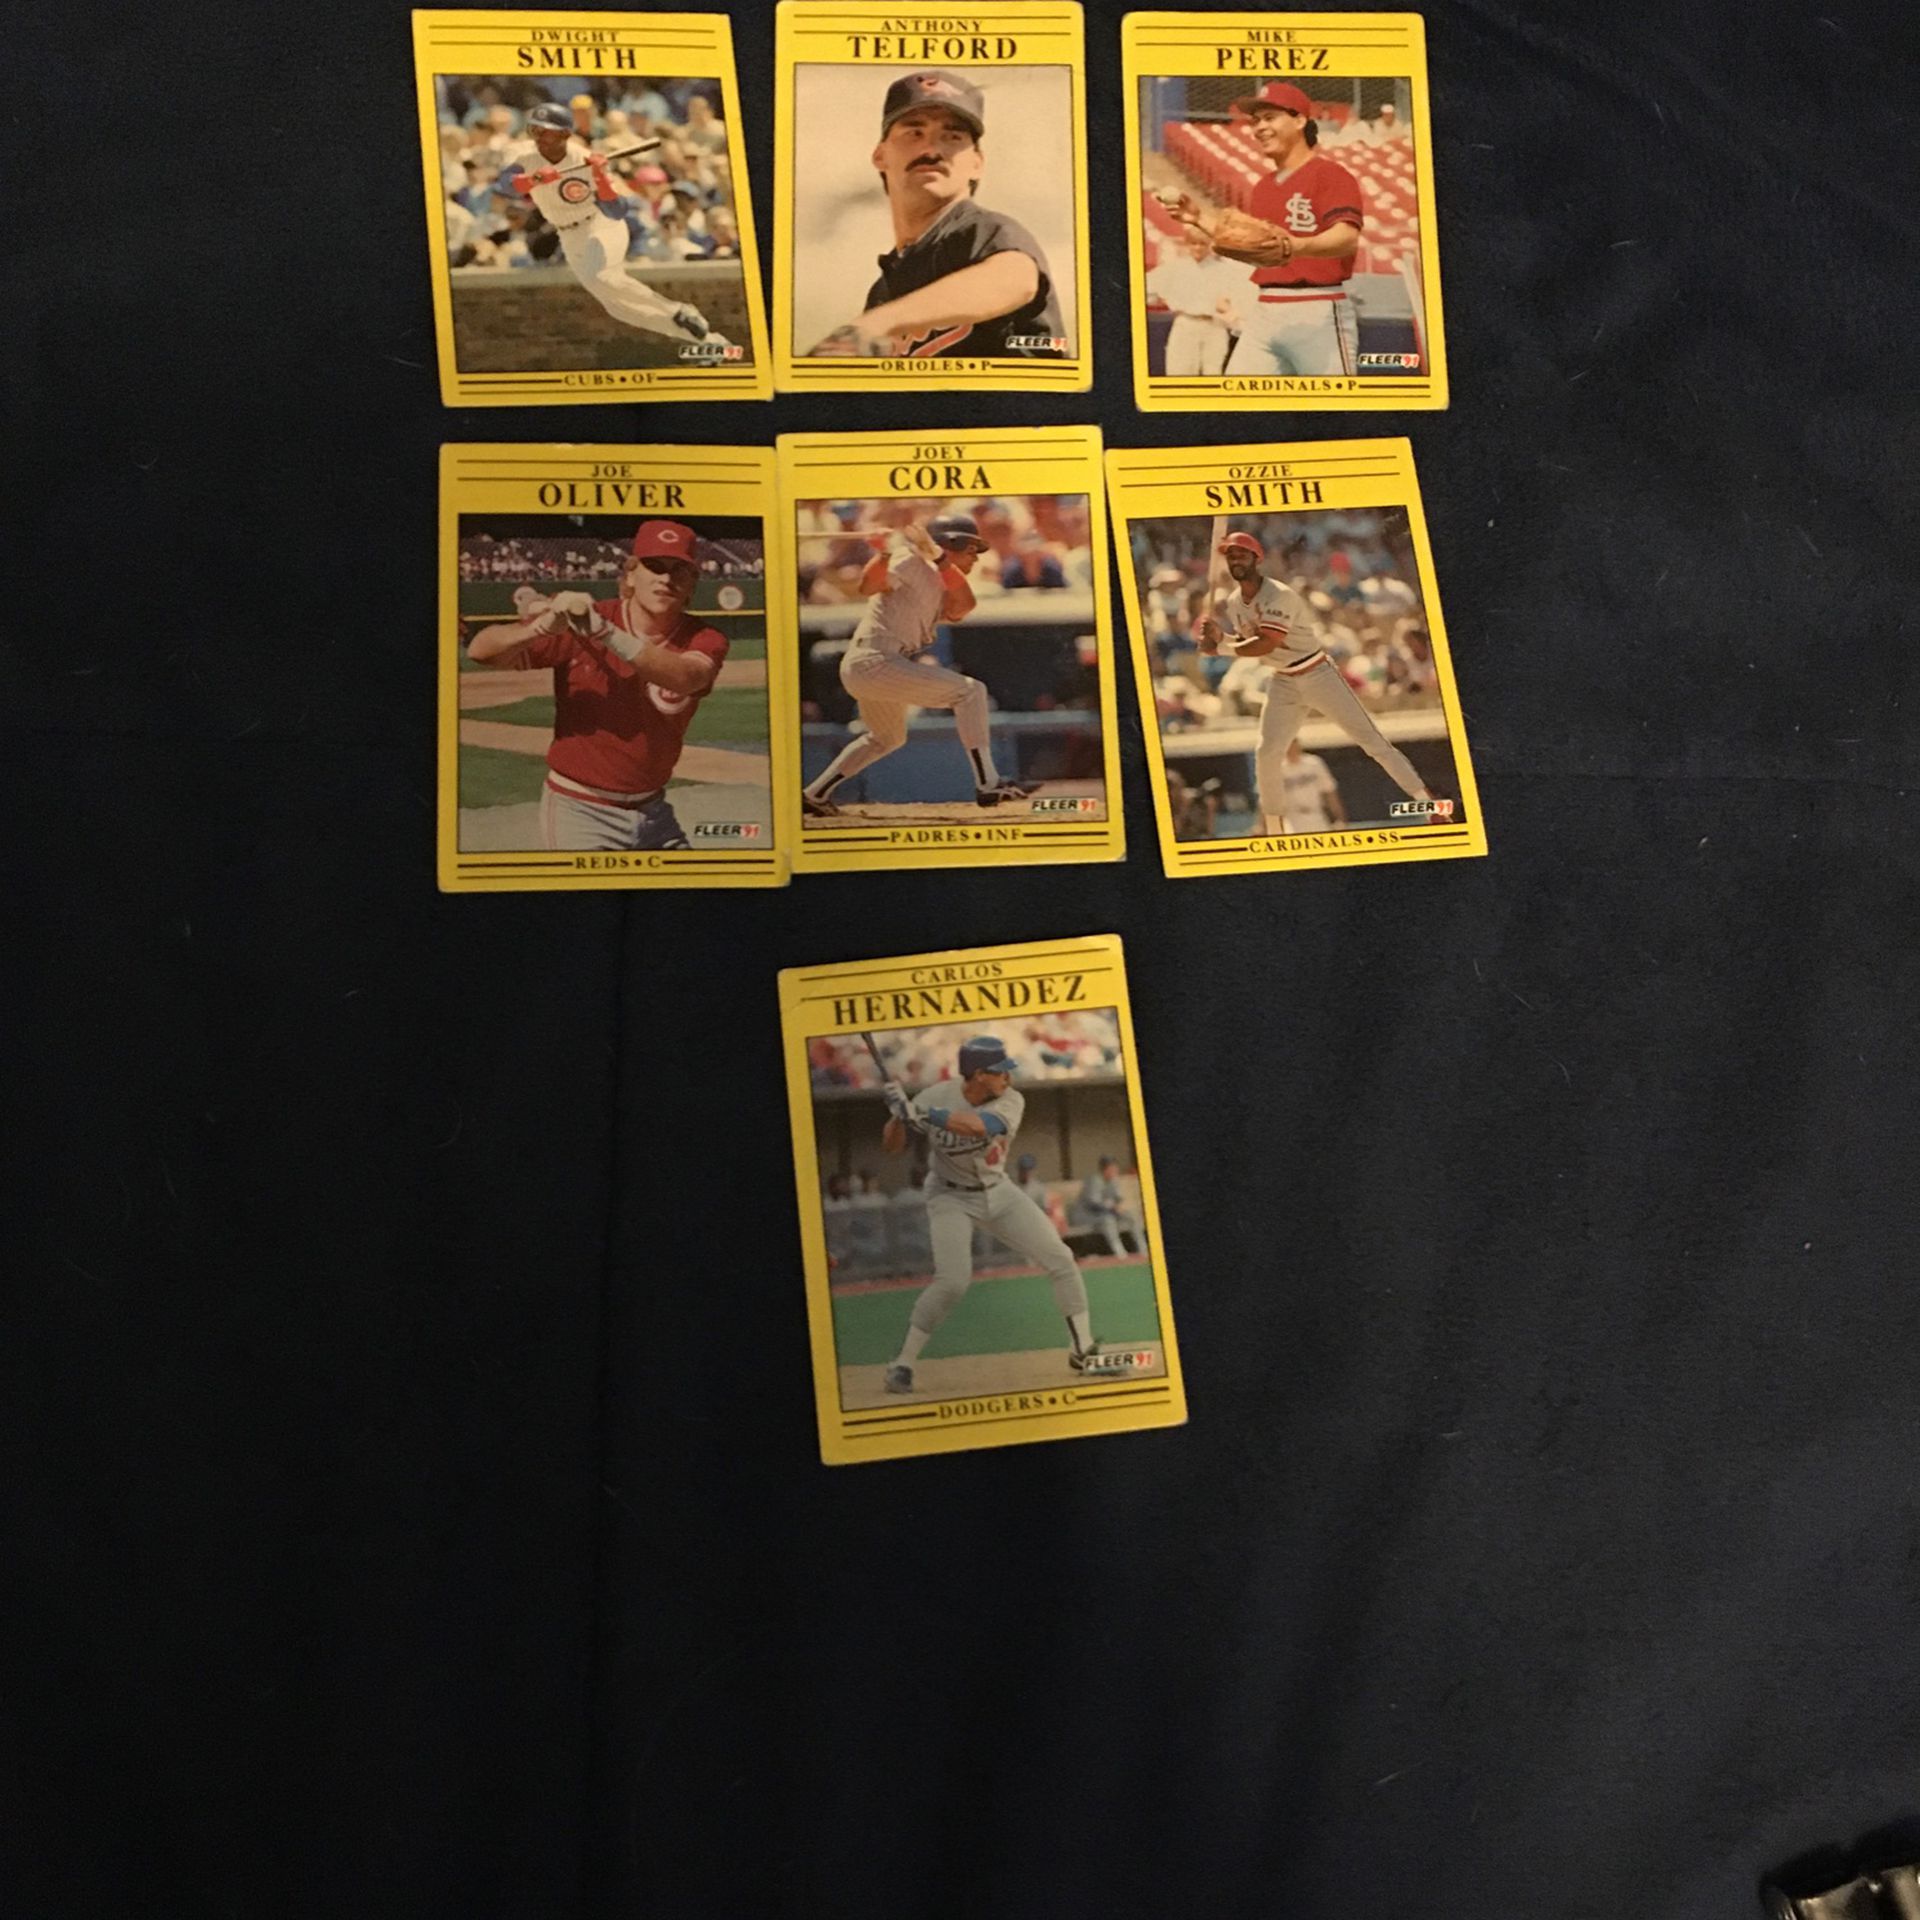 Baseball Cards From 1 Dollar To 2.50$